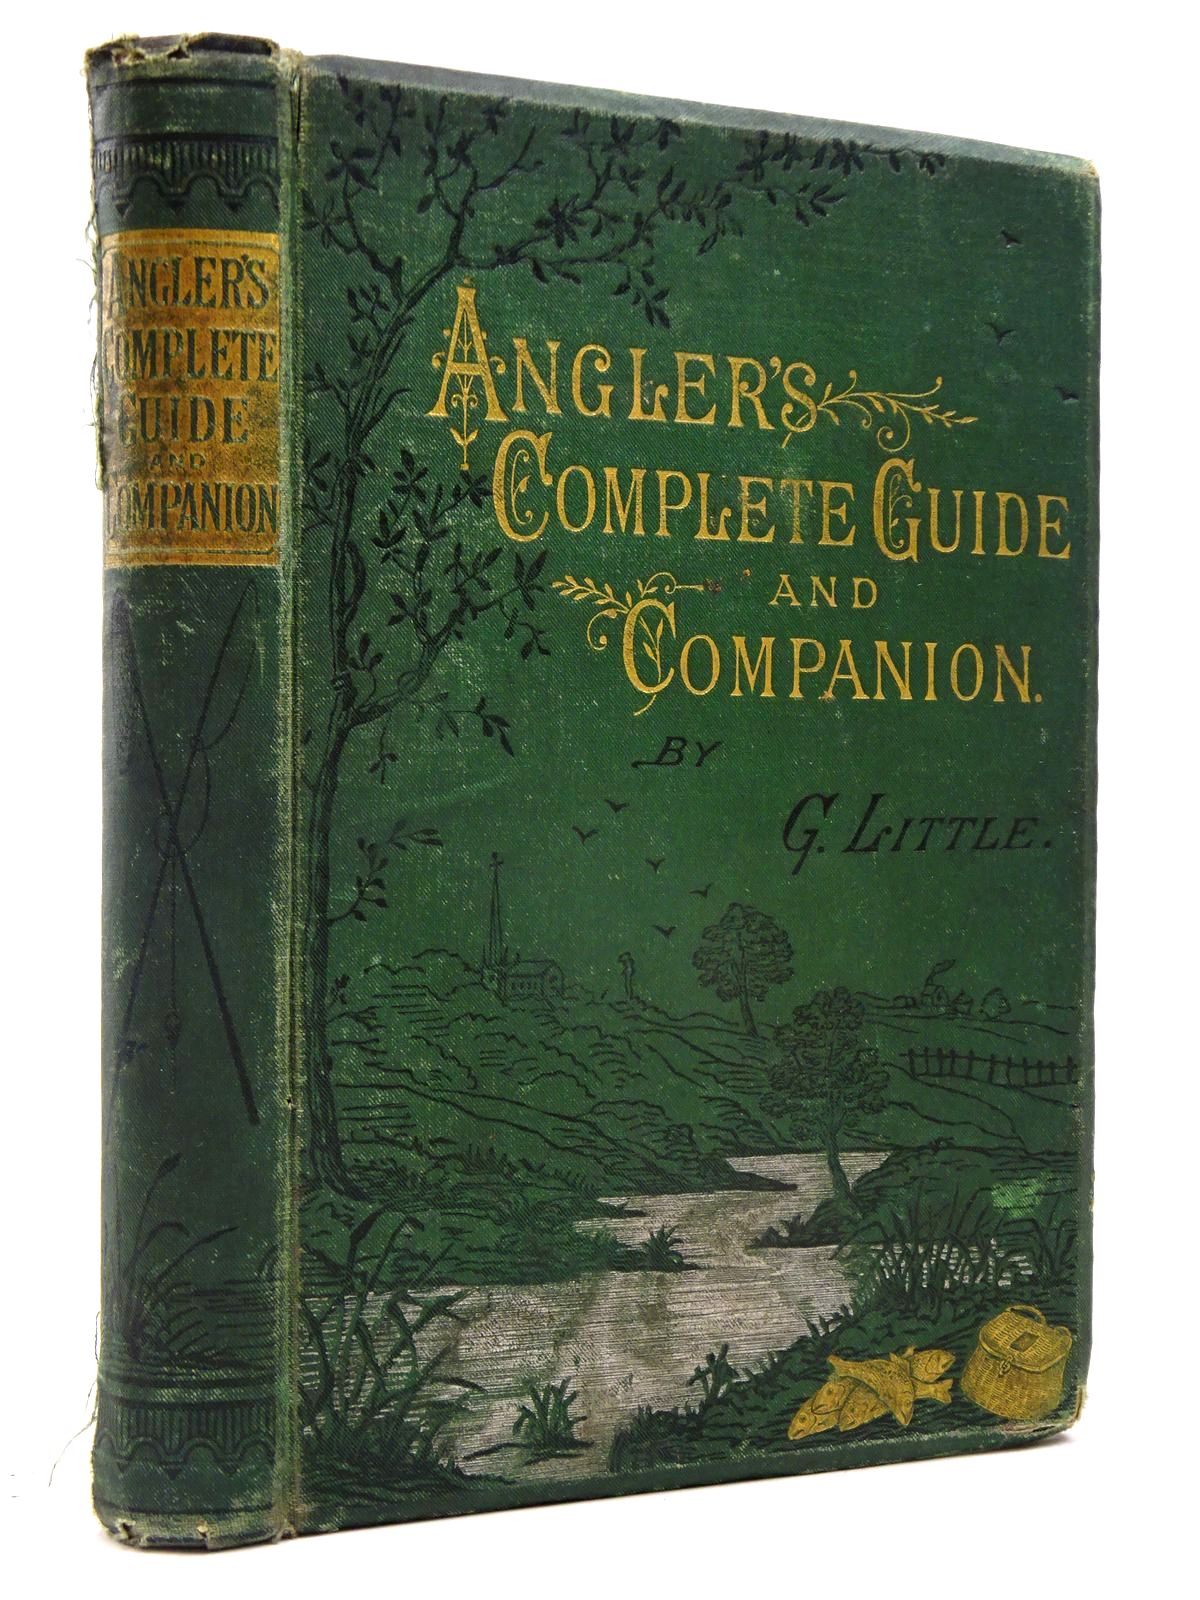 Photo of THE ANGLER'S COMPLETE GUIDE AND COMPANION written by Little, G. published by G. Little (STOCK CODE: 2130569)  for sale by Stella & Rose's Books